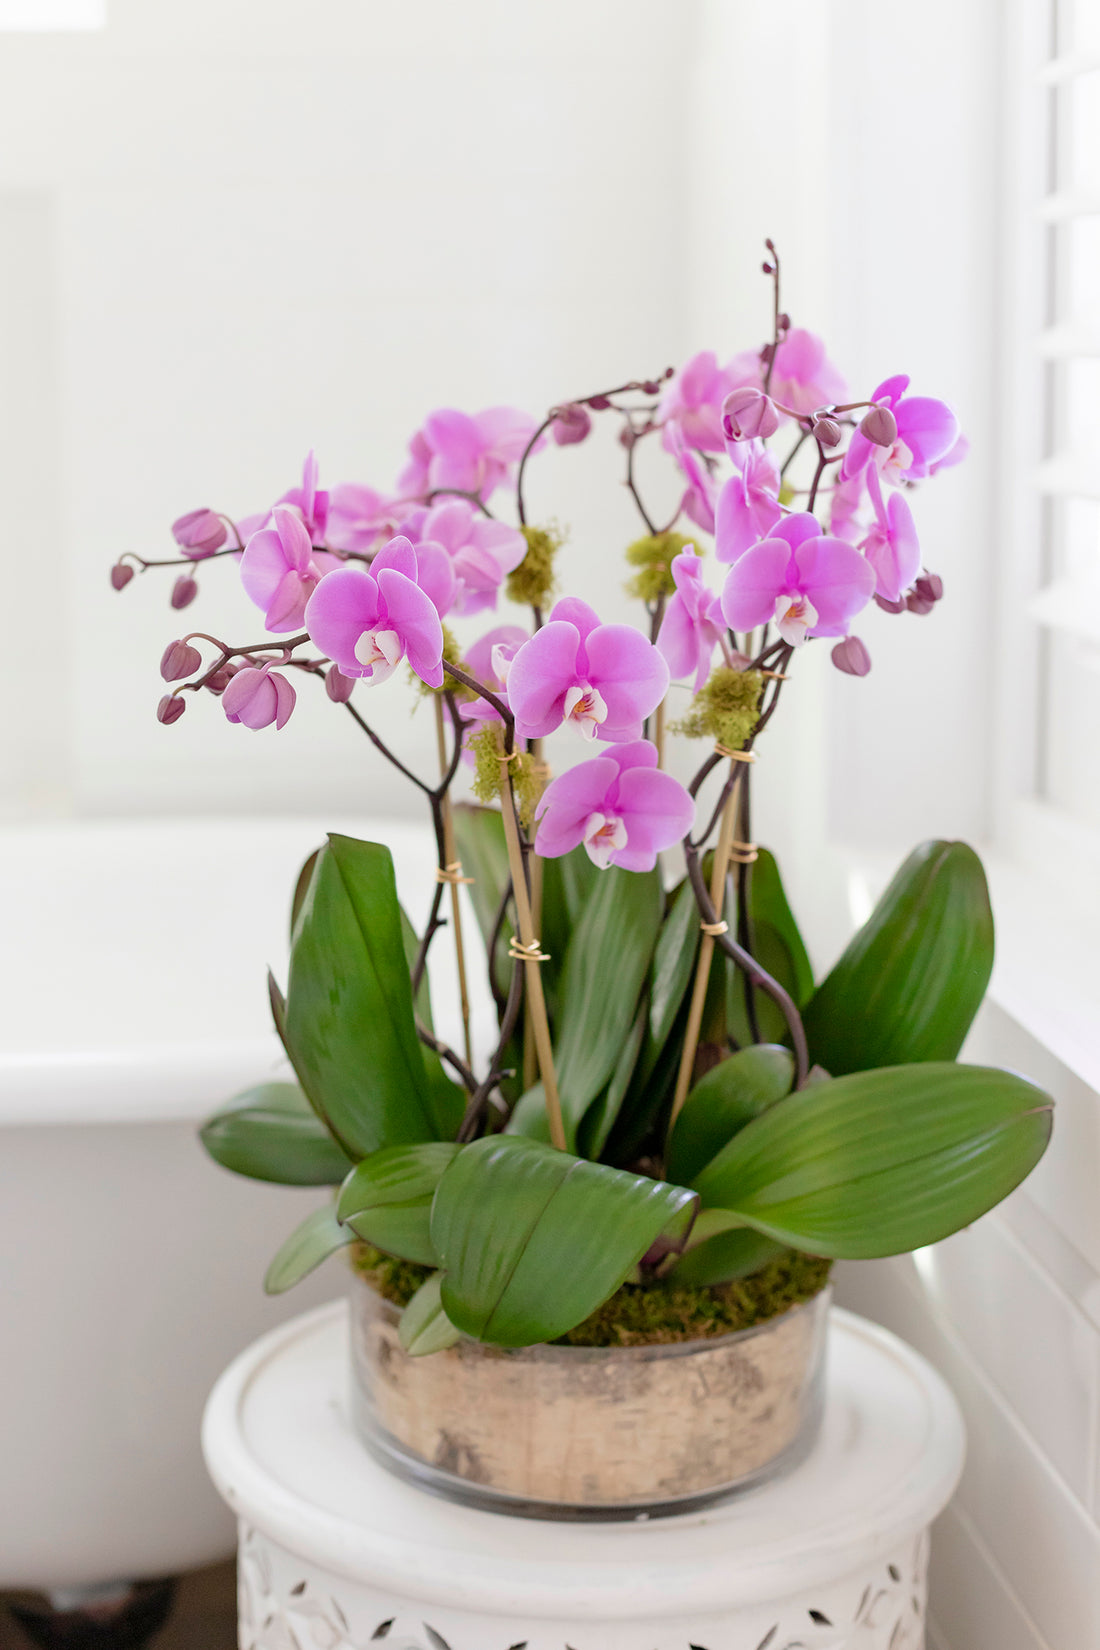 HOW TO TAKE CARE OF ORCHIDS